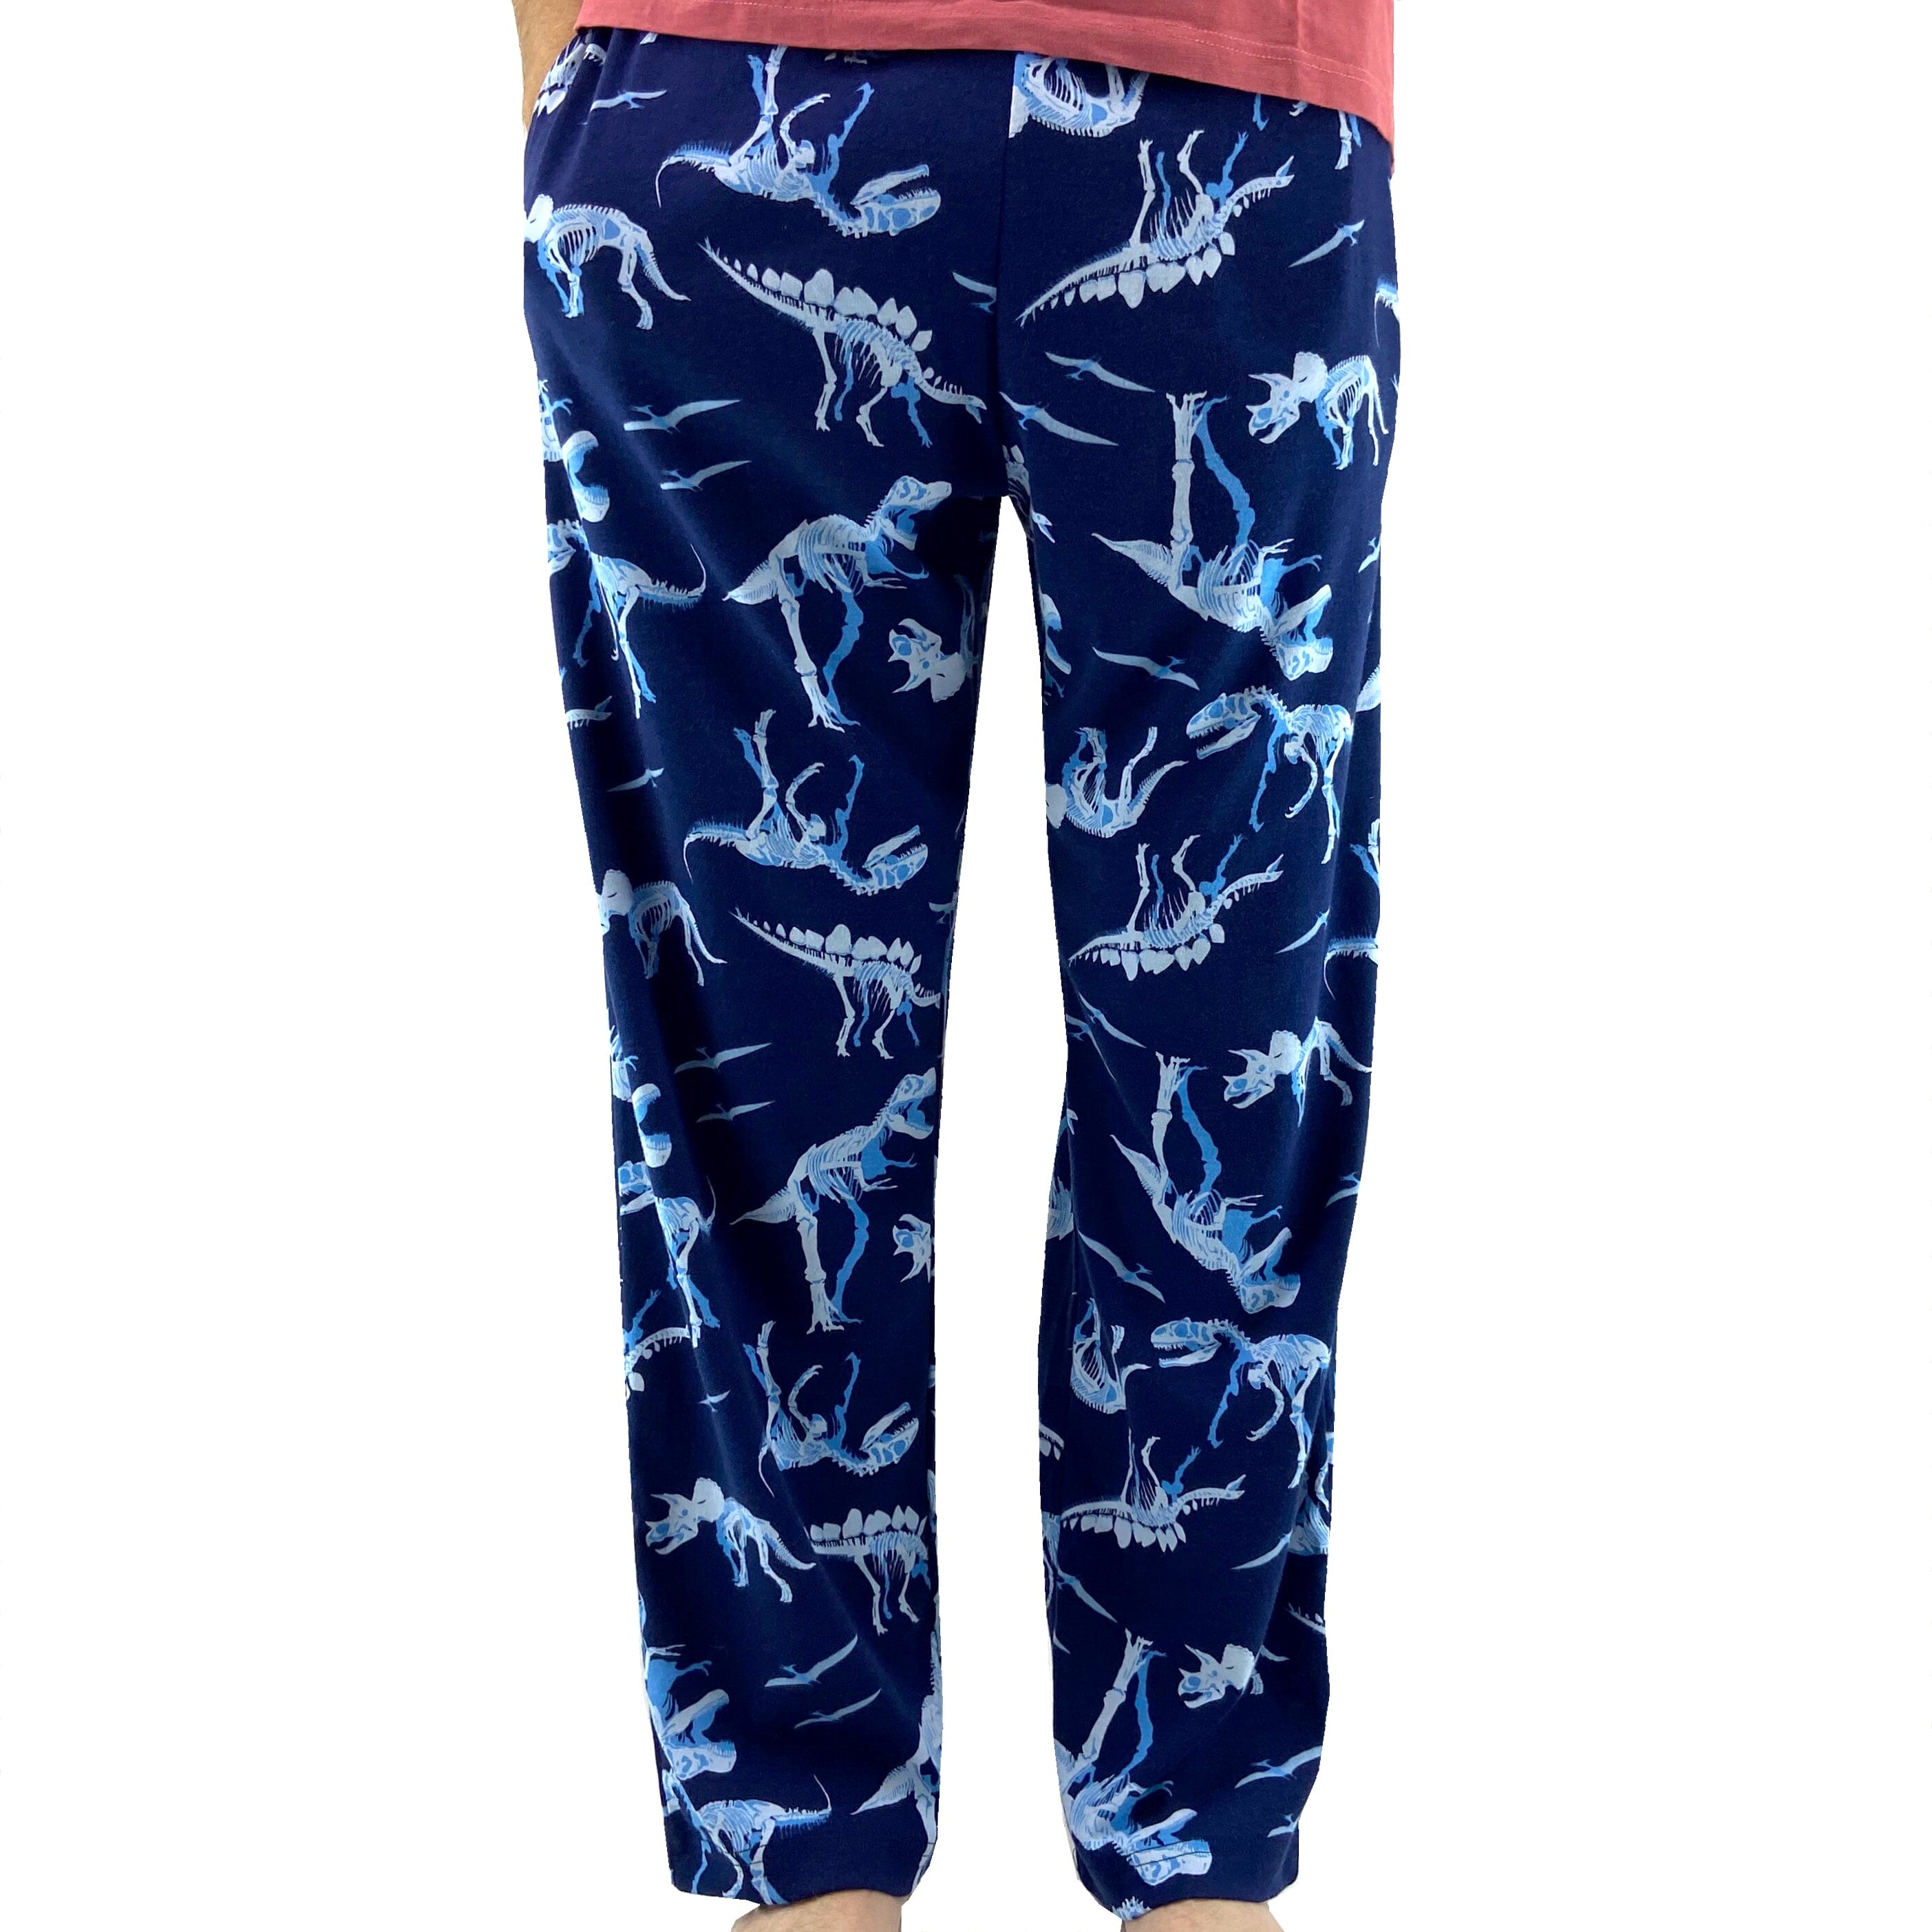 Buy Marks & Spencer Printed Trousers online - Men - 2 products | FASHIOLA.in